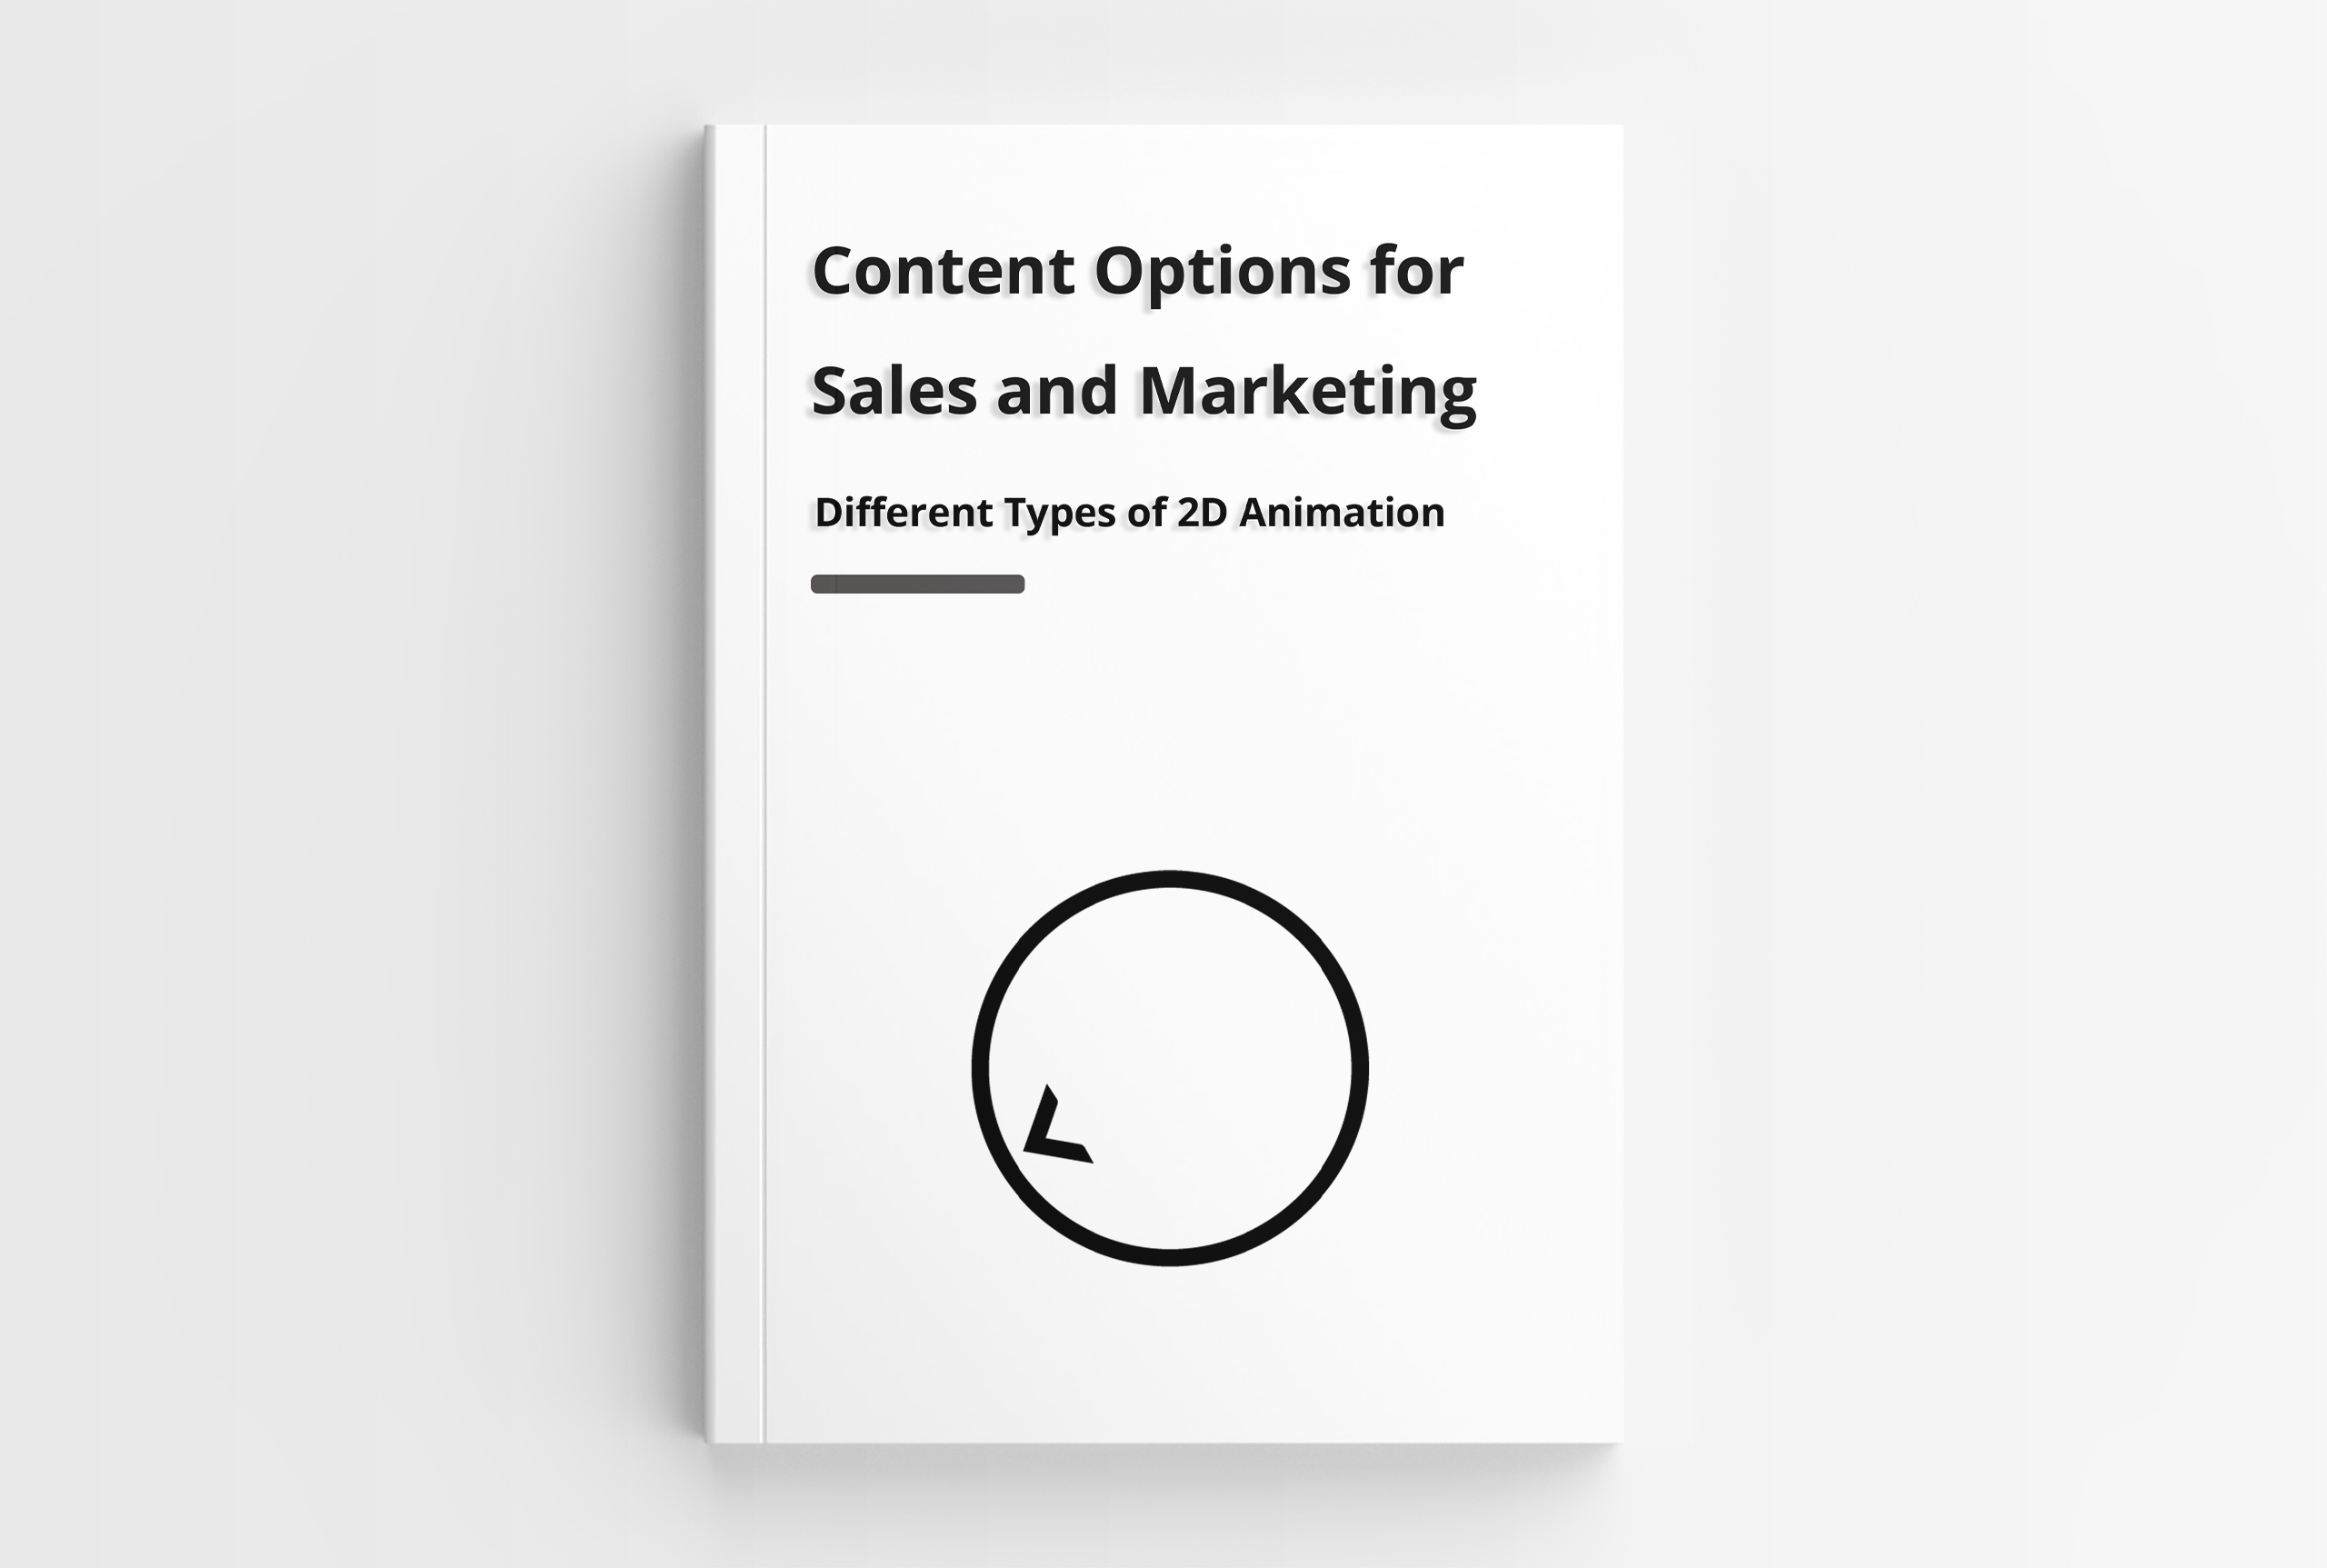 2D Animation content options for sales and marketing